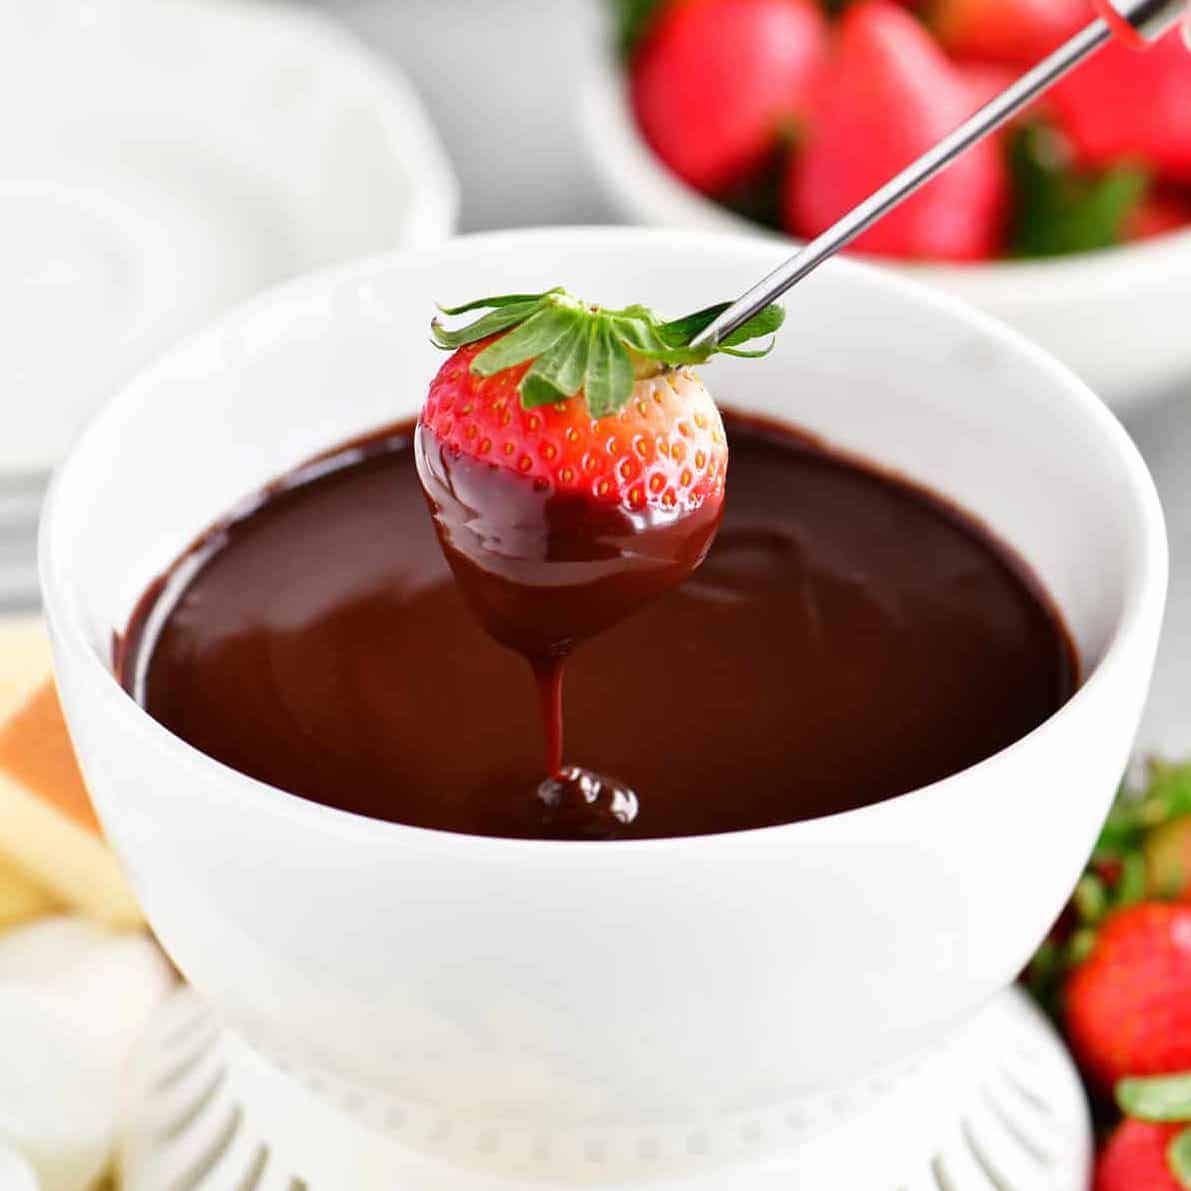 strawberry dipped in chocolate fondue.